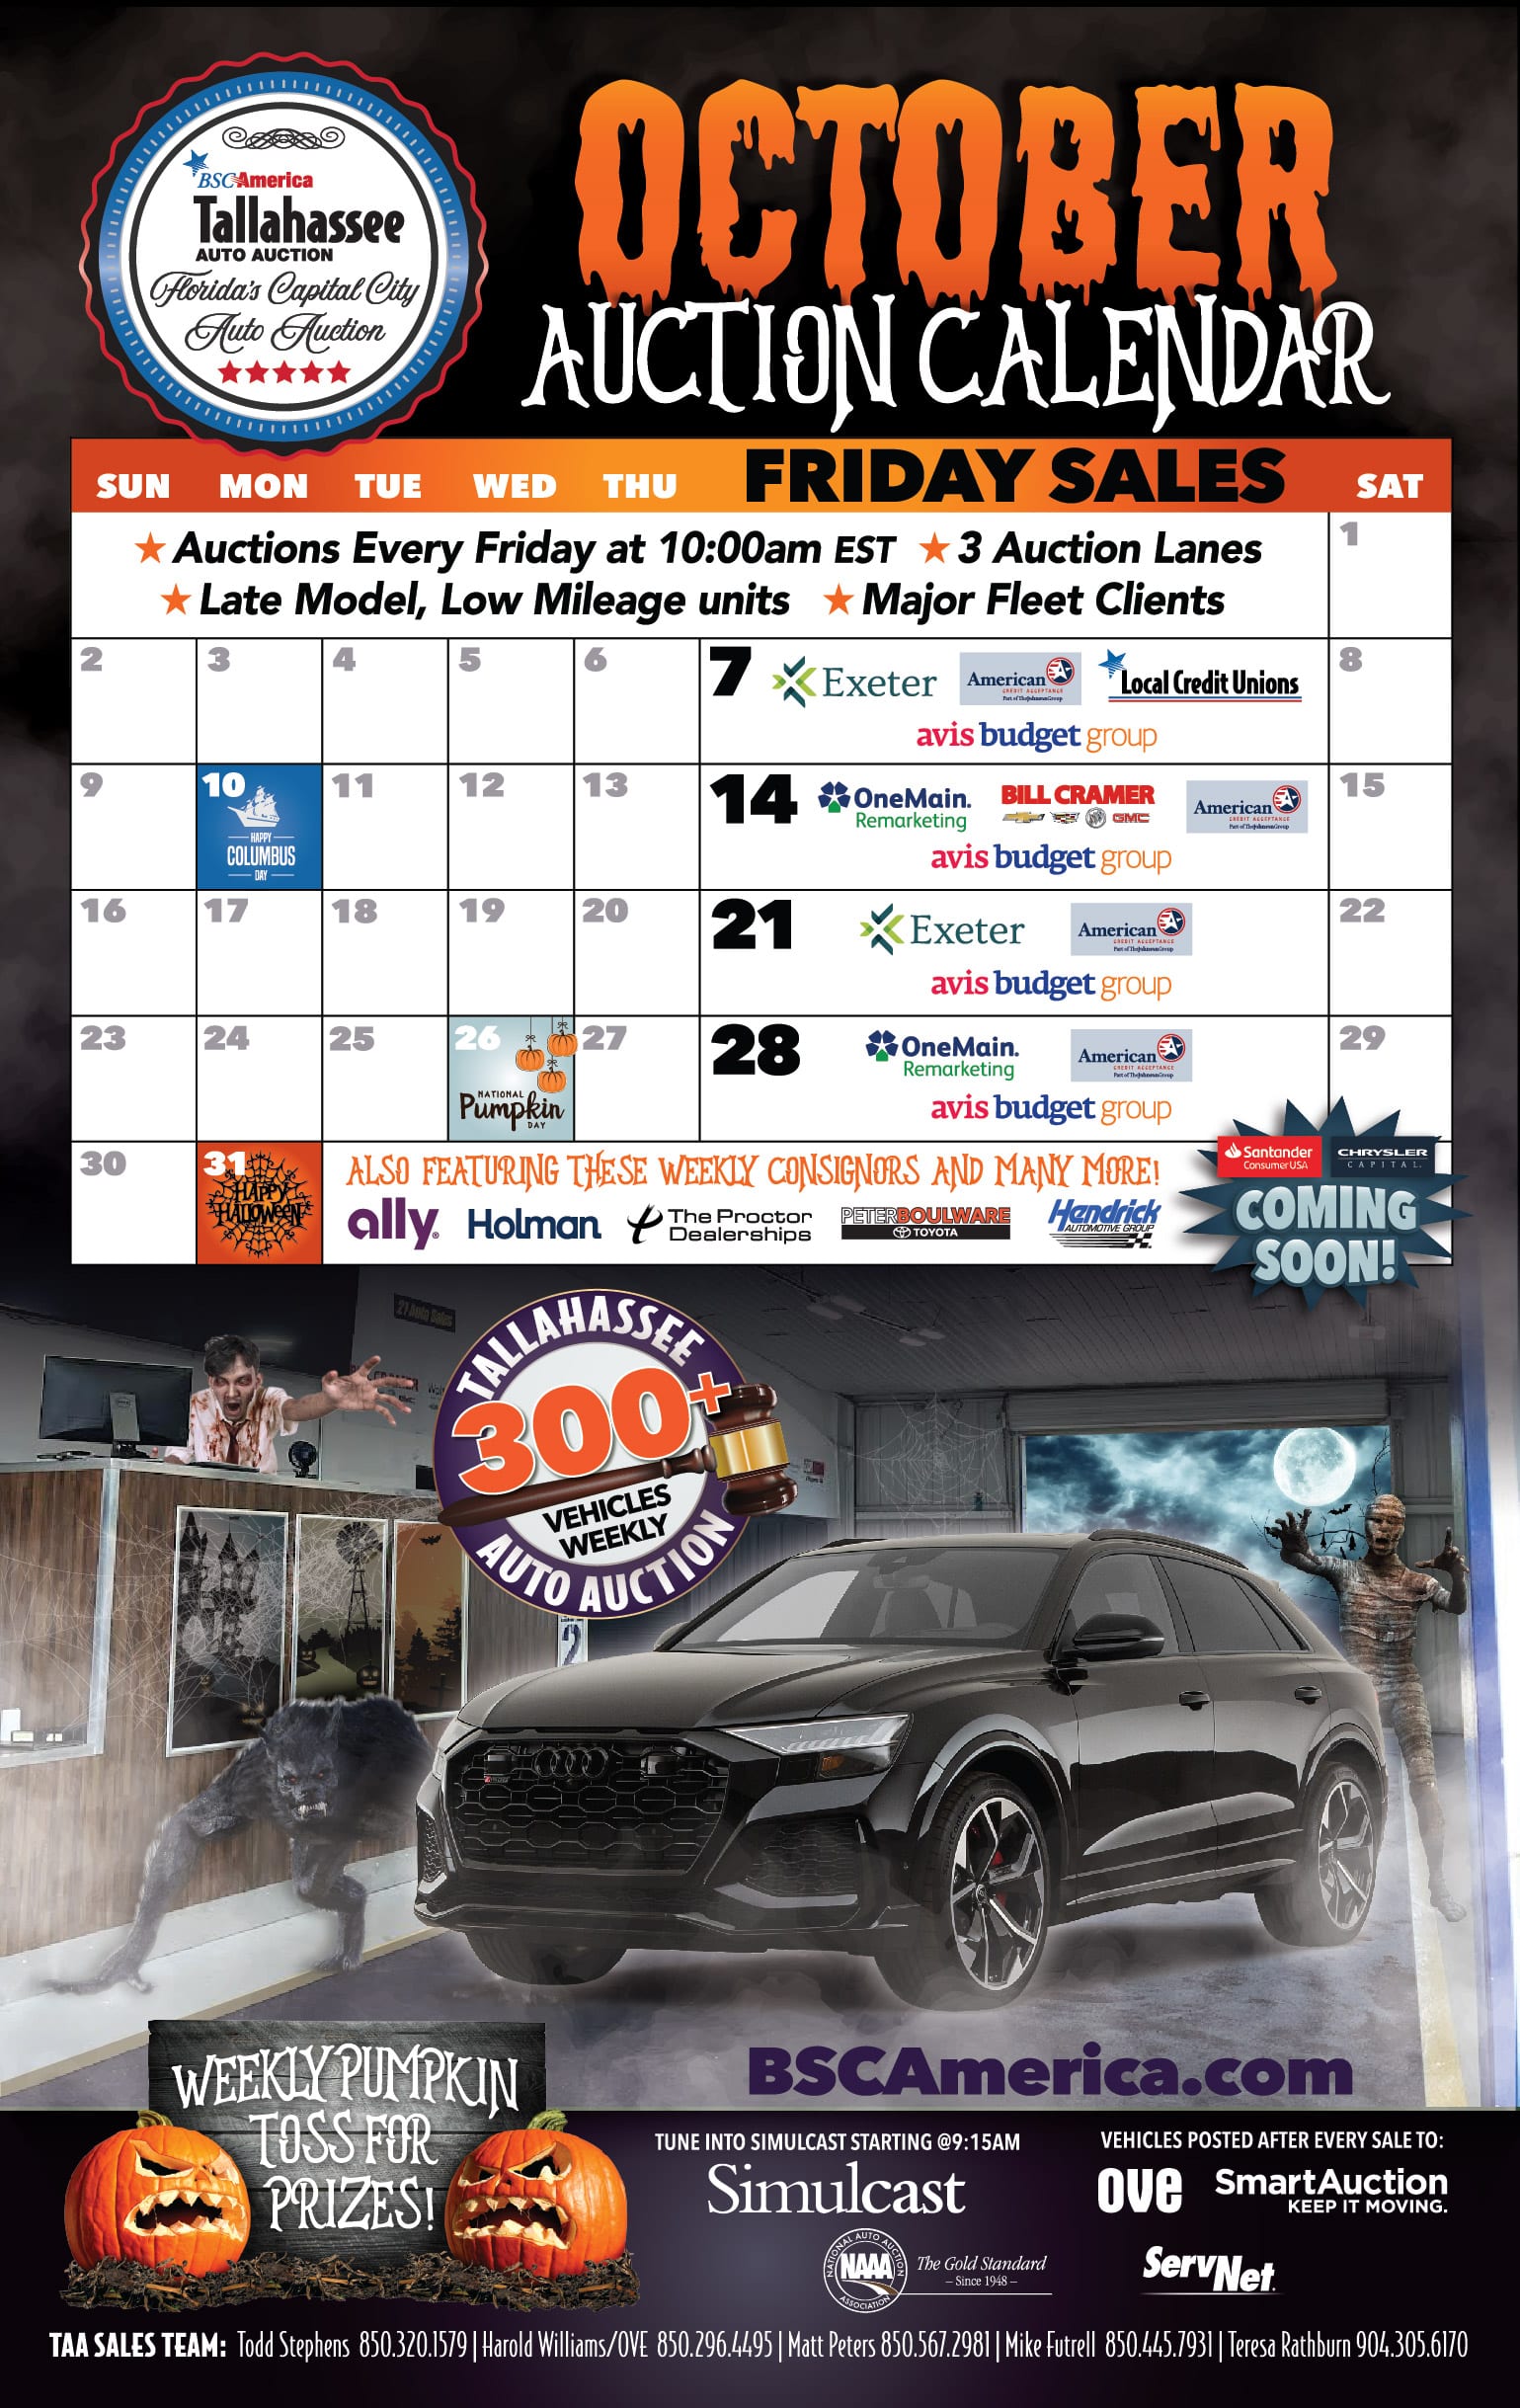 Tallahassee Auto Auction Calendar & Events